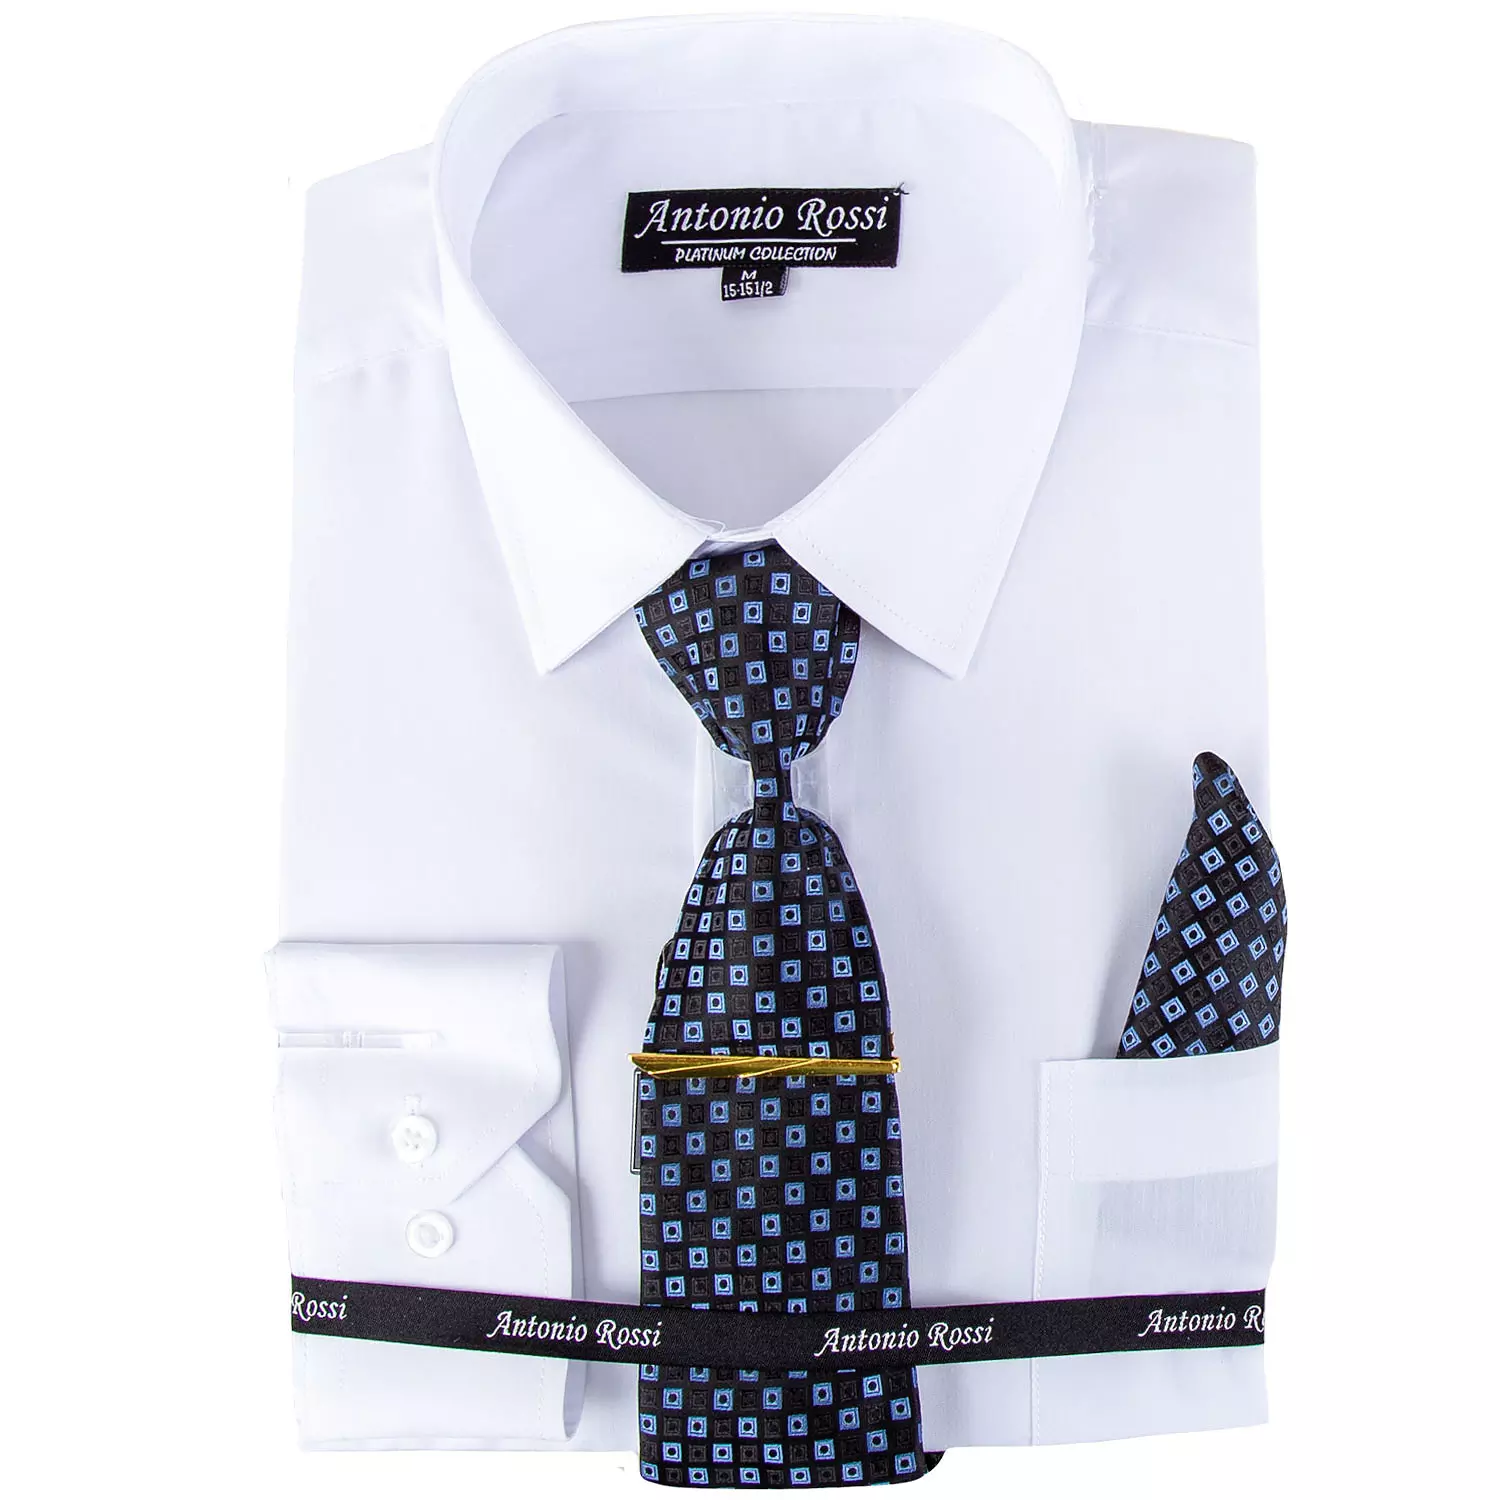 Antonio Rossi - Men's boxed dress shirt with tie, tie clip and hankerchief, white shirt, 15-15.5